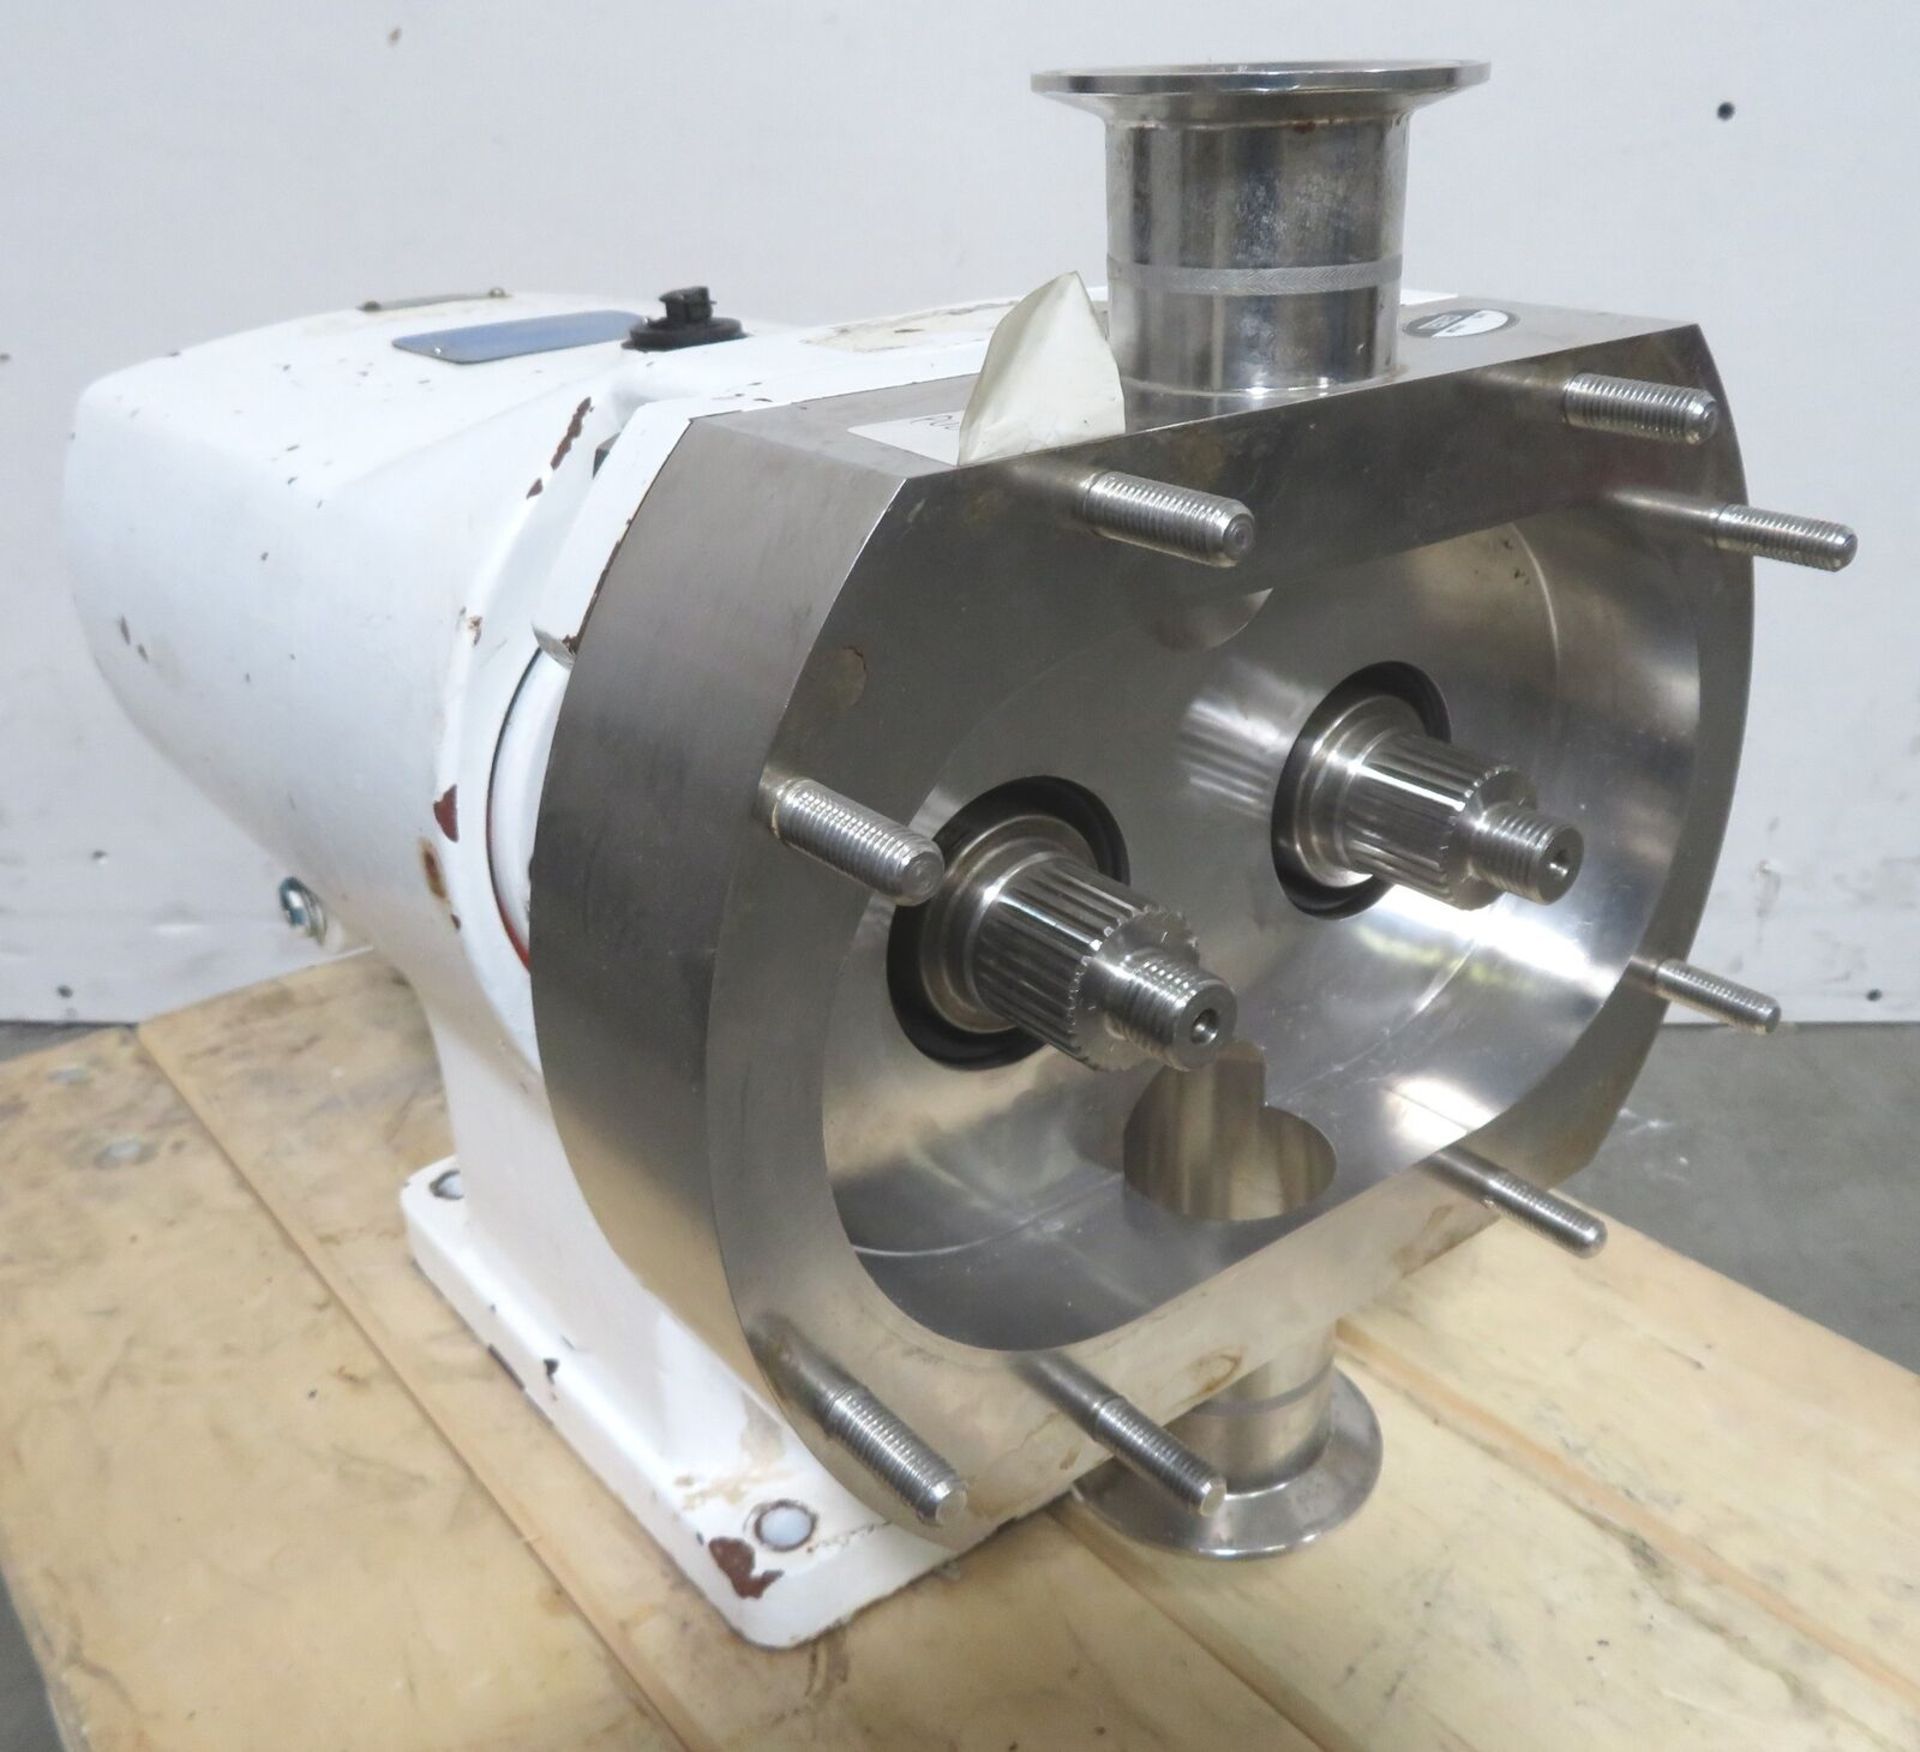 G&H Products 622 Rotary Lobe Pump Head (1-7/8"ID, 3"OD Sanitary Flanges) - Gilroy - Image 4 of 9